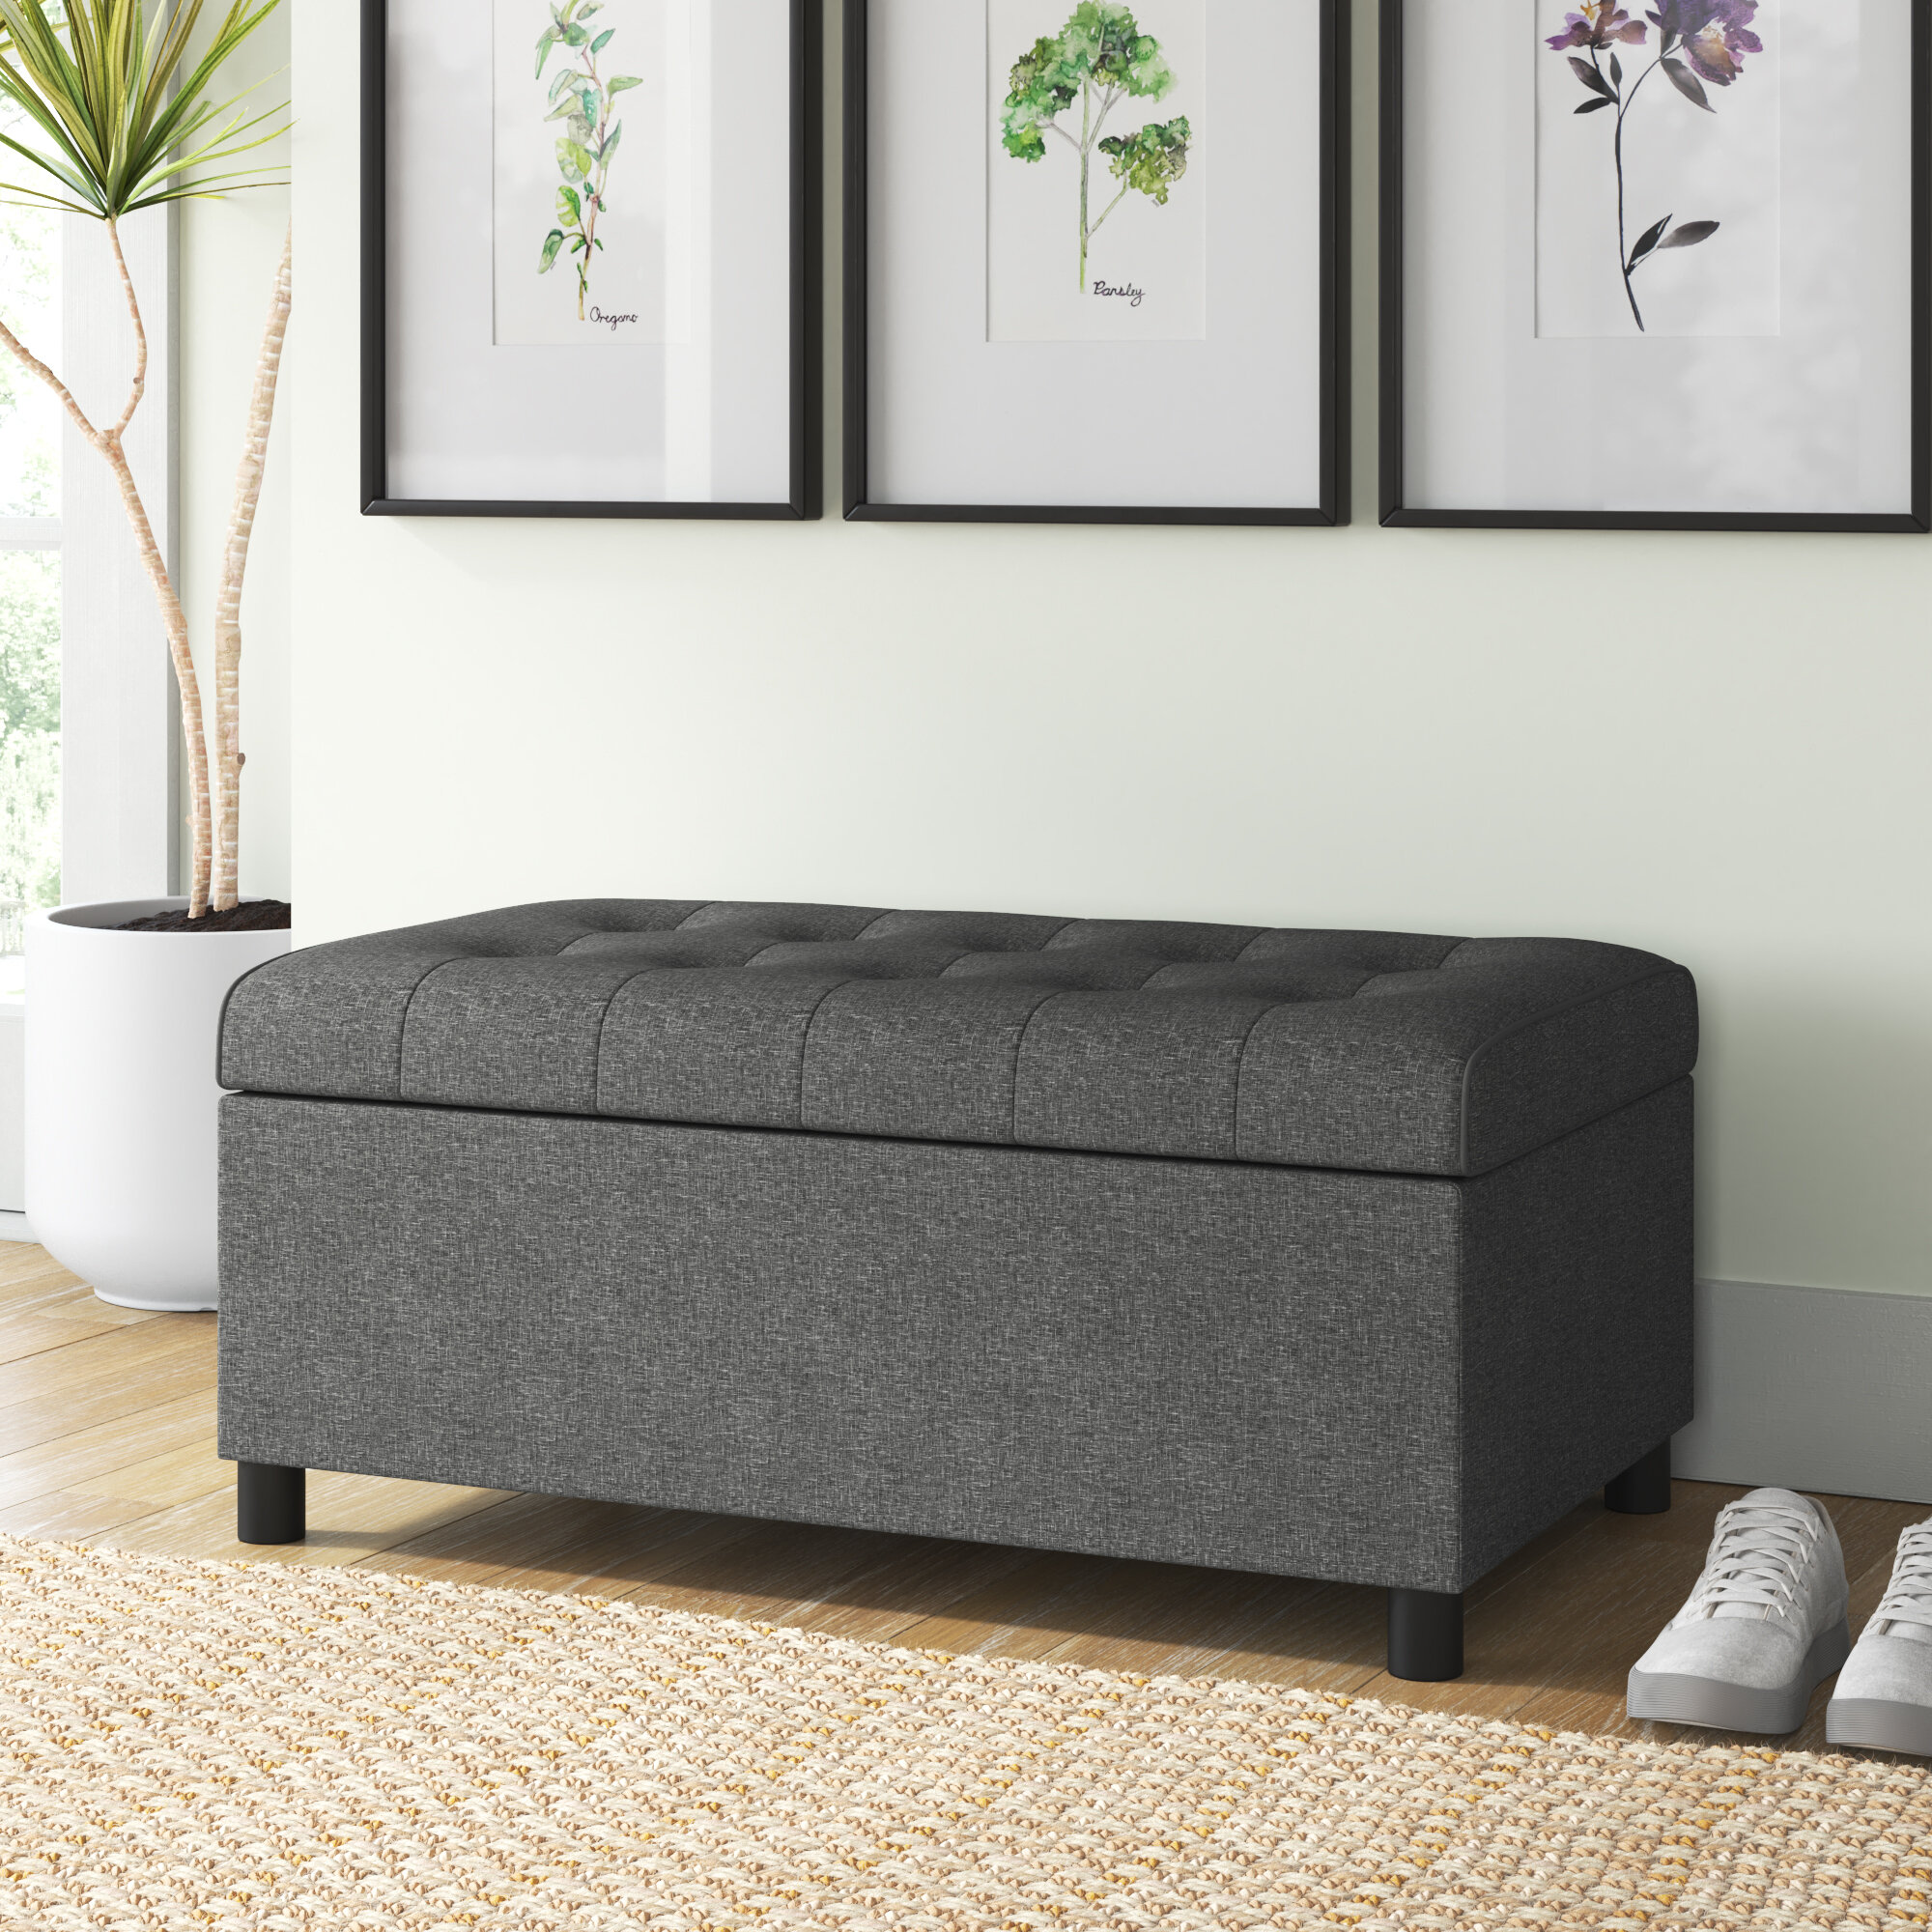 Stylish Ottoman in Crushed Velvet Fabric ideal Storage and Seating Solution !!!! 